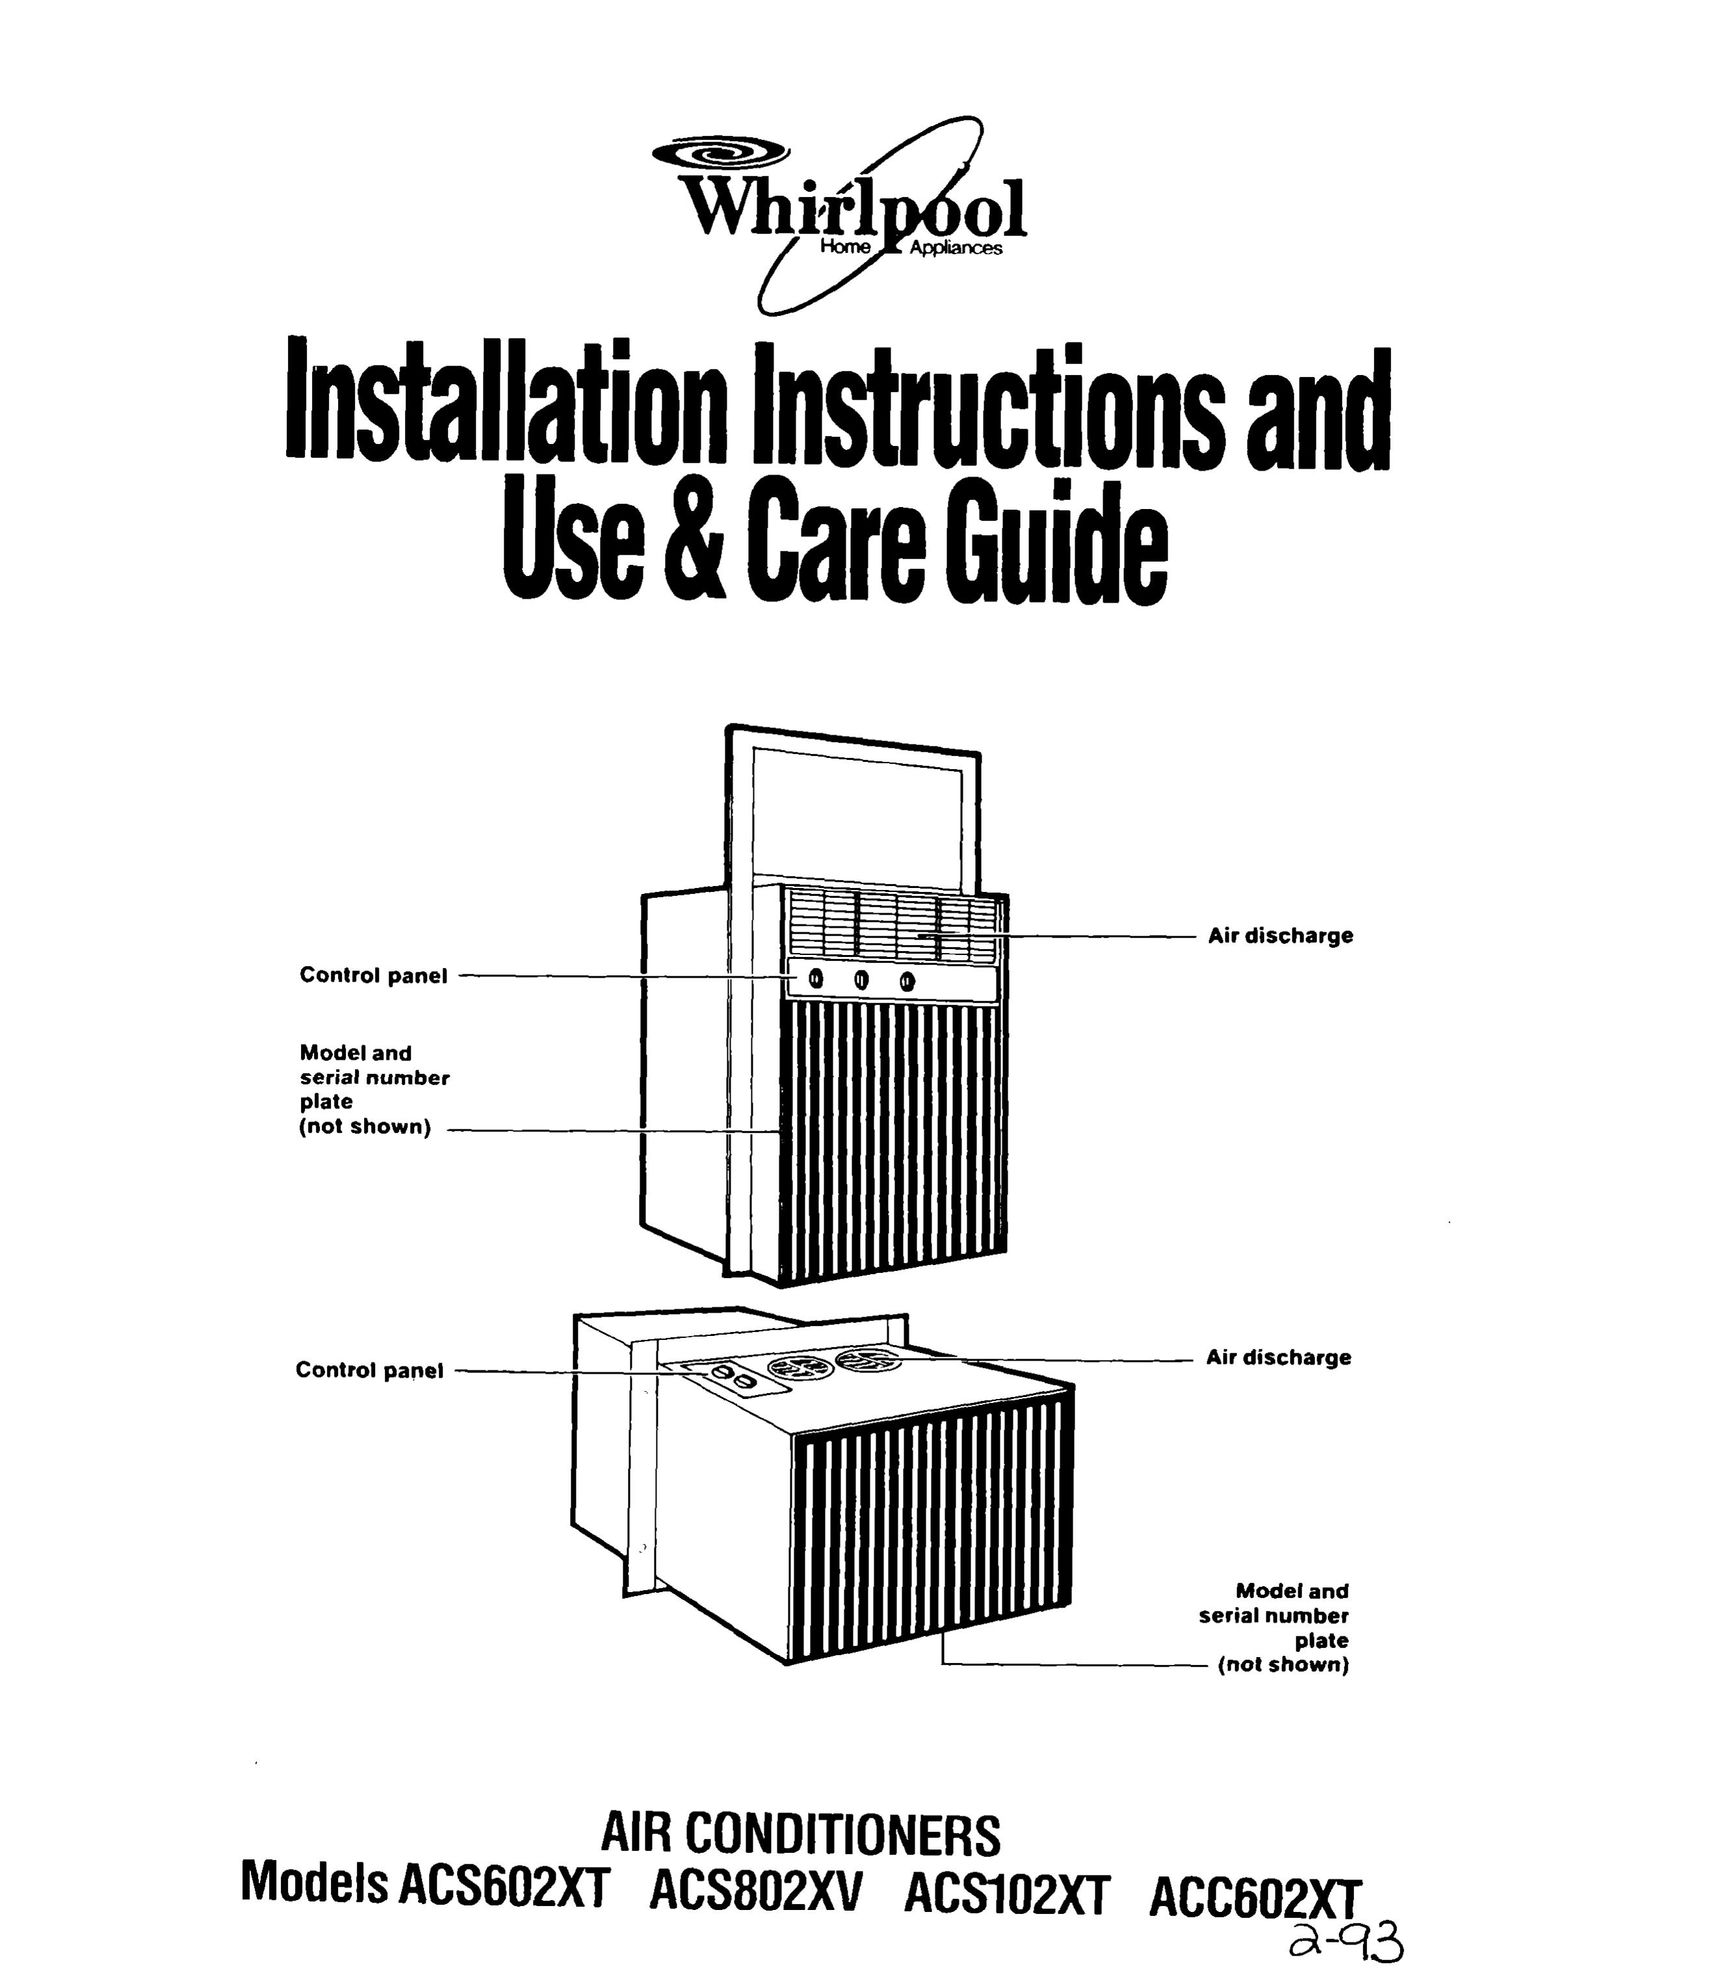 Whirlpool ACC602XT Air Conditioner User Manual